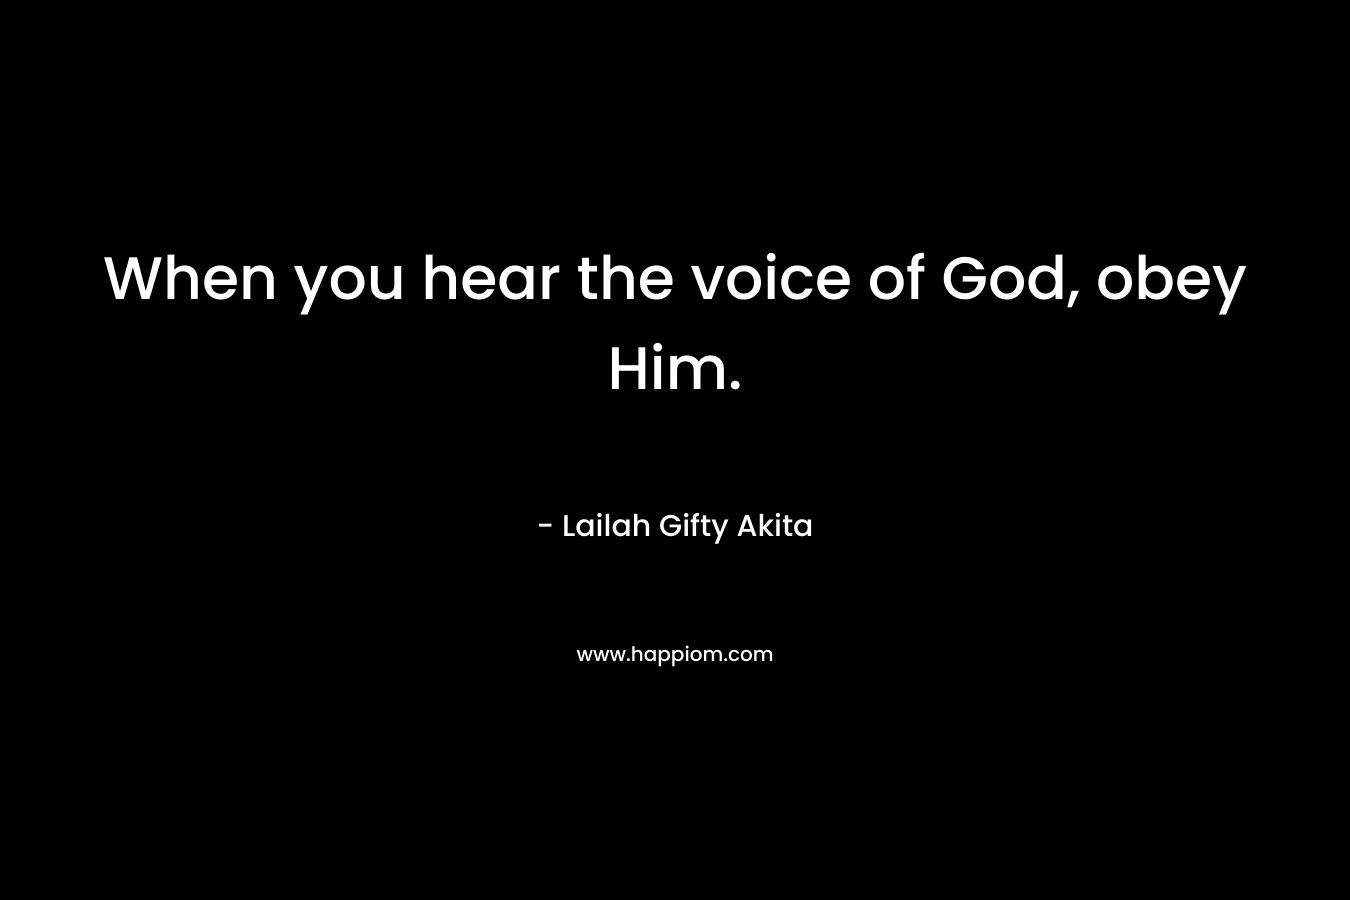 When you hear the voice of God, obey Him.